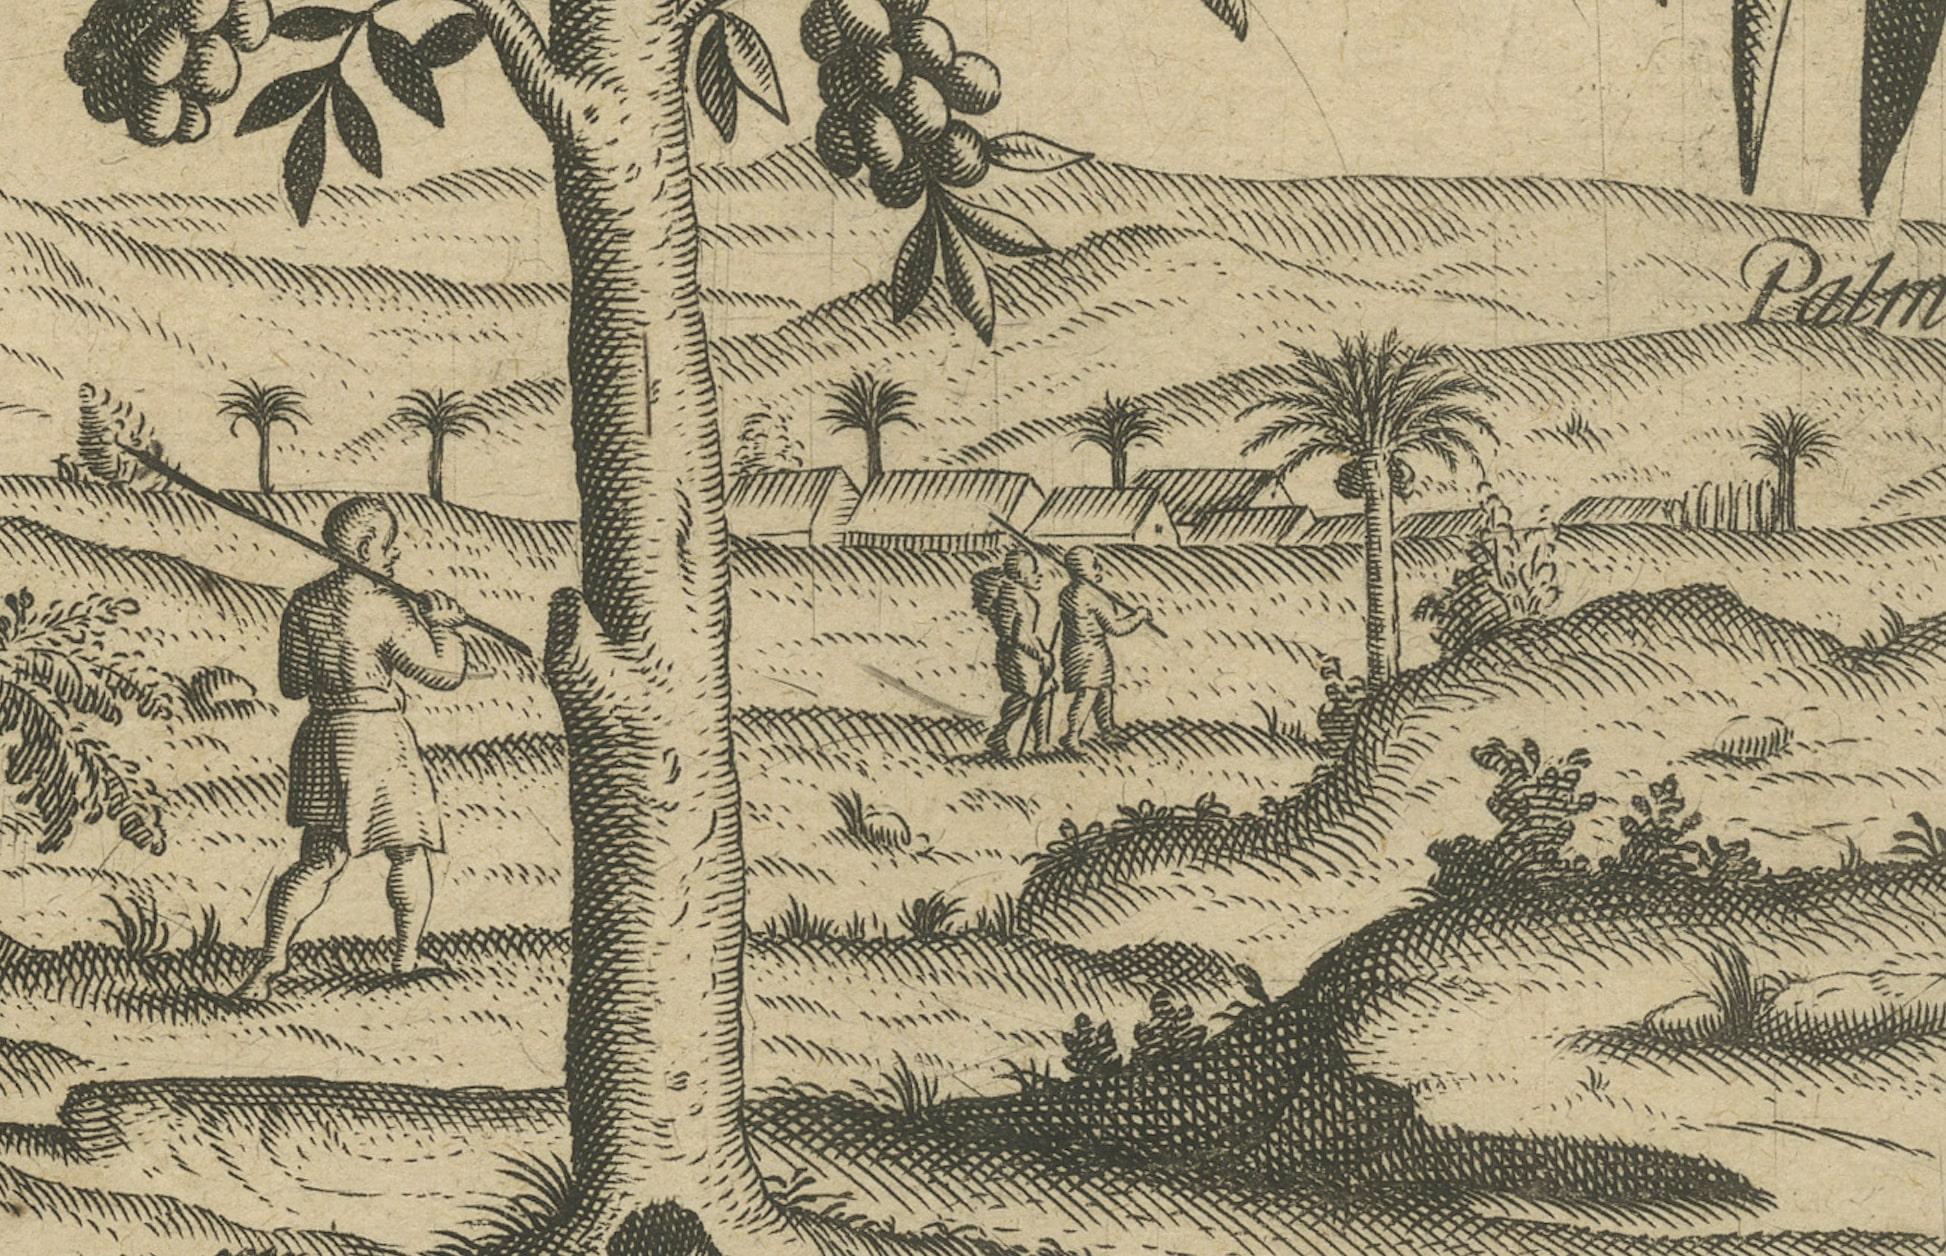 Paper Tropical Abundance: The Jackfruit and Palm Trees in De Bry's 1601 Engraving For Sale